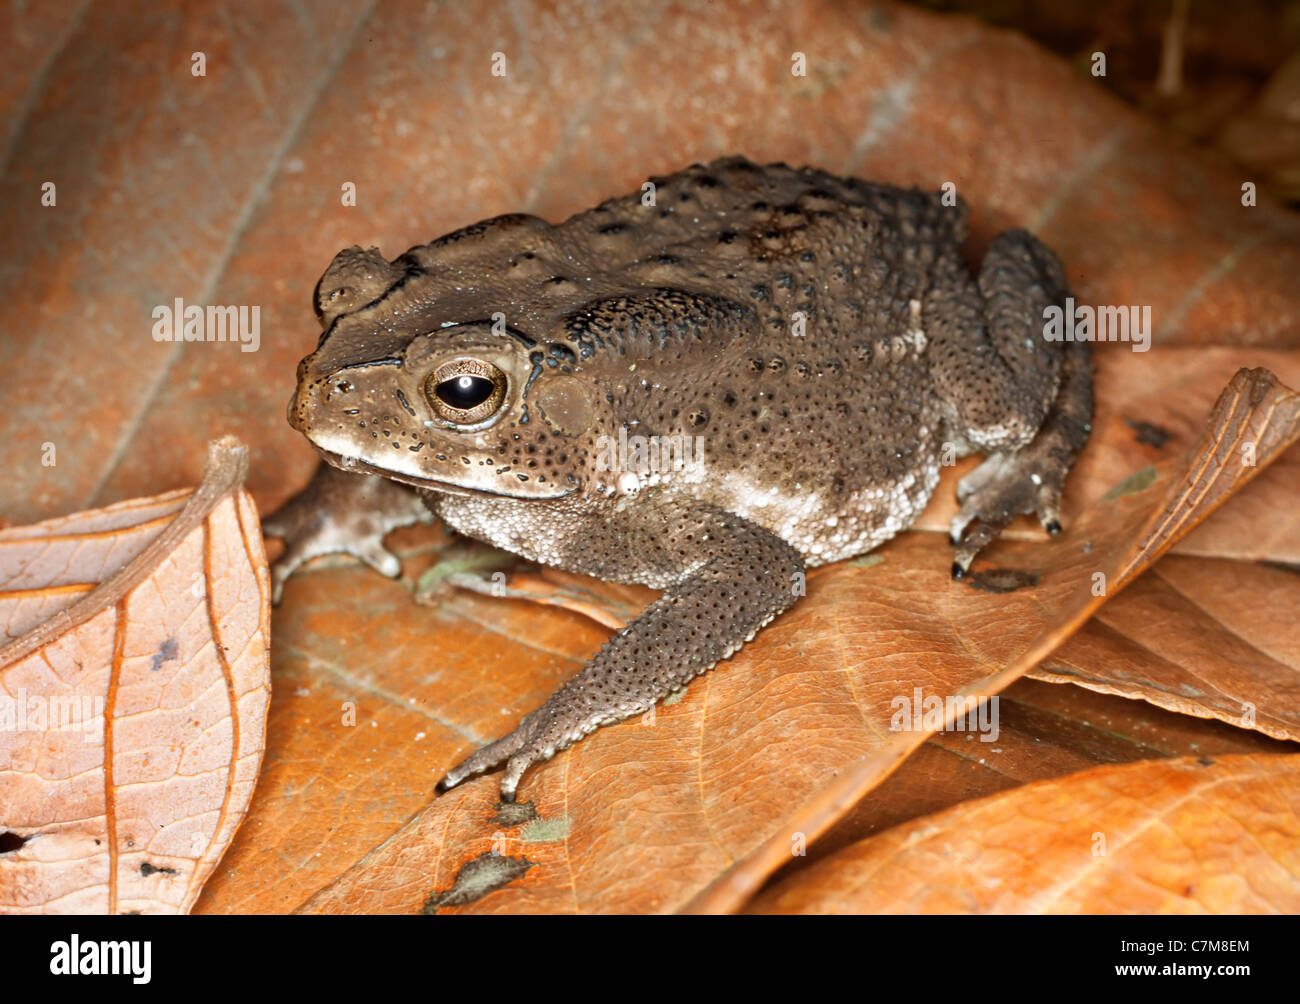 Forest toad in leaf litter, Mulu National Park, Sarawak, Borneo, East Malaysia Stock Photo